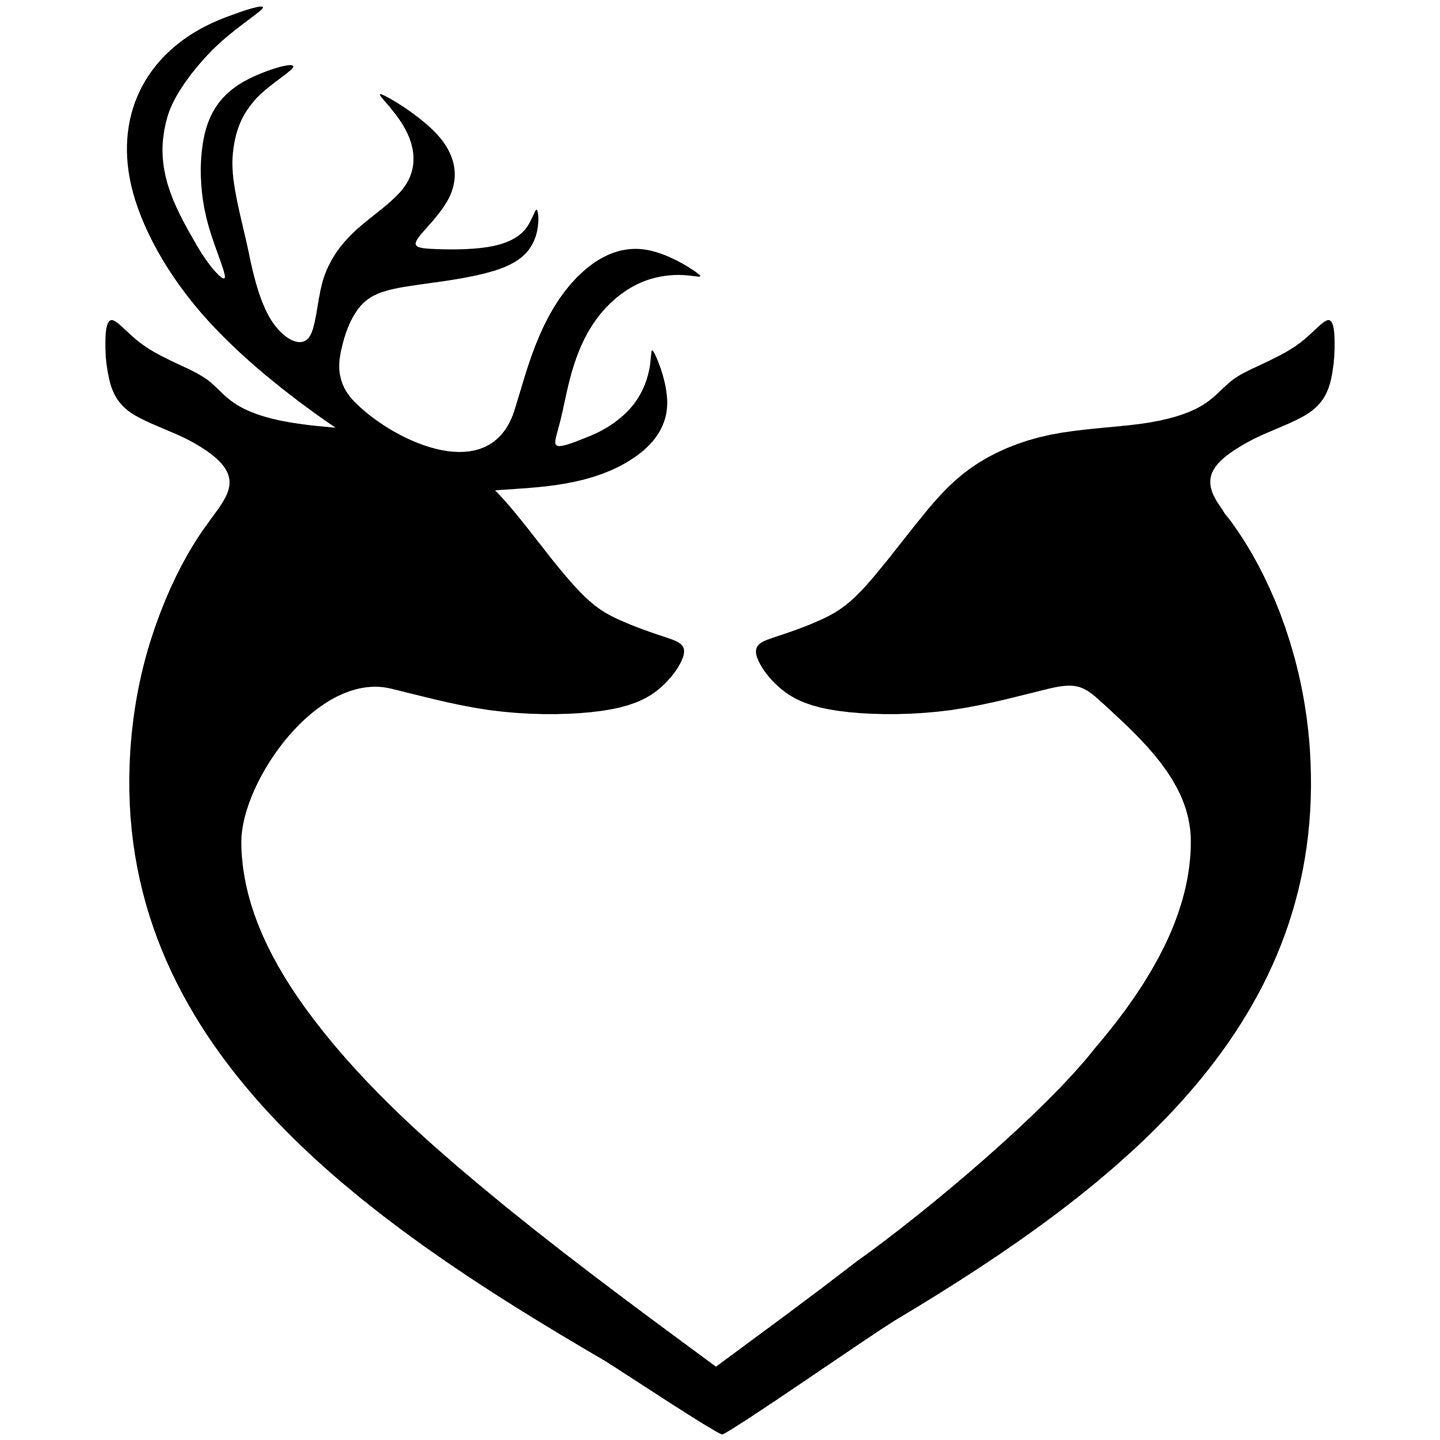 Download Deer Head Couple Silhouette Clip Art 8 inches PNG & SVG